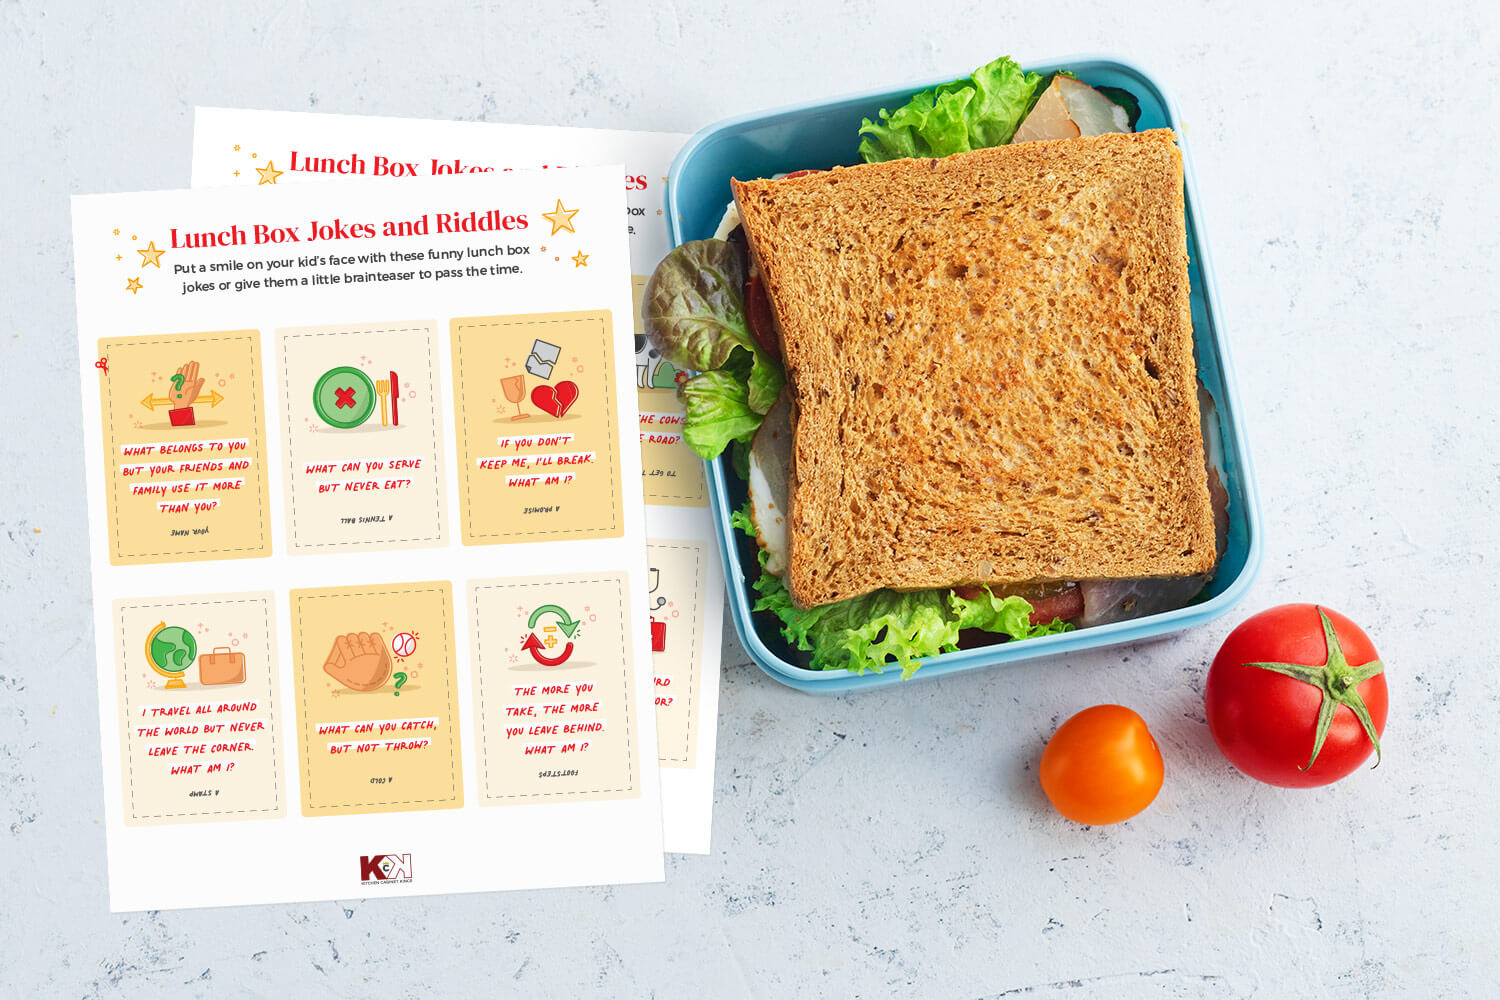 Printable lunch box jokes and riddles next to a sandwich on a white countertop.